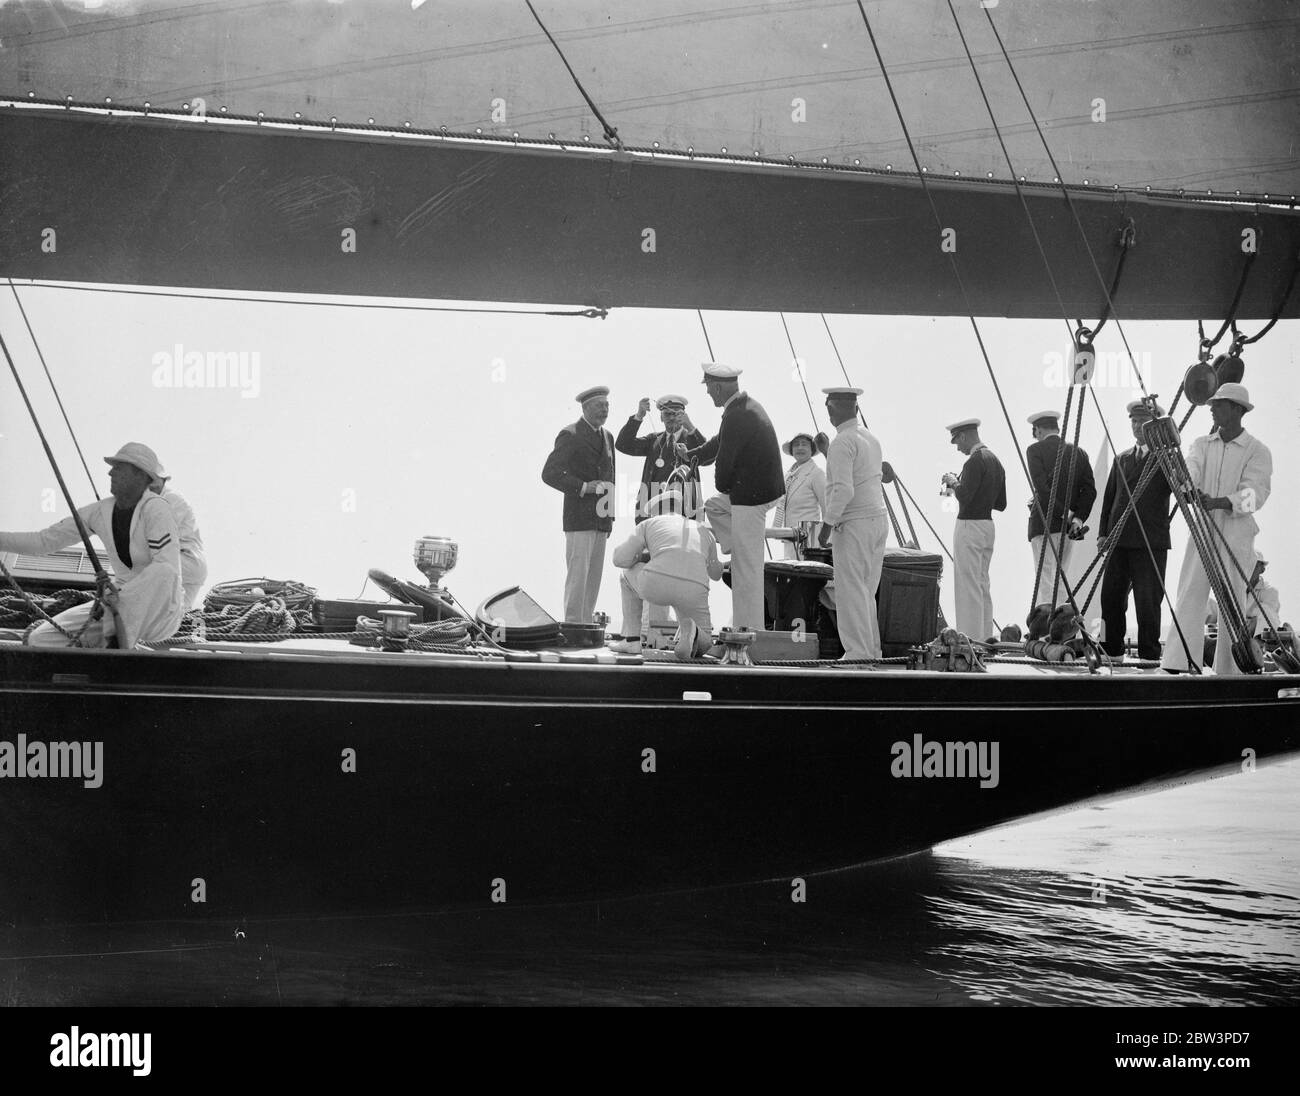 The King himself was at the helm of his half century old yacht Britannia when she competed against the American cutter Yankee and other famous big yachts in the races of the Royal Thames Yacht club of Ryde onthe Isel of Wighty . Photo shoes the Duke and Duchess of York aboard Britannia during the racing . 31 July 1935 Stock Photo